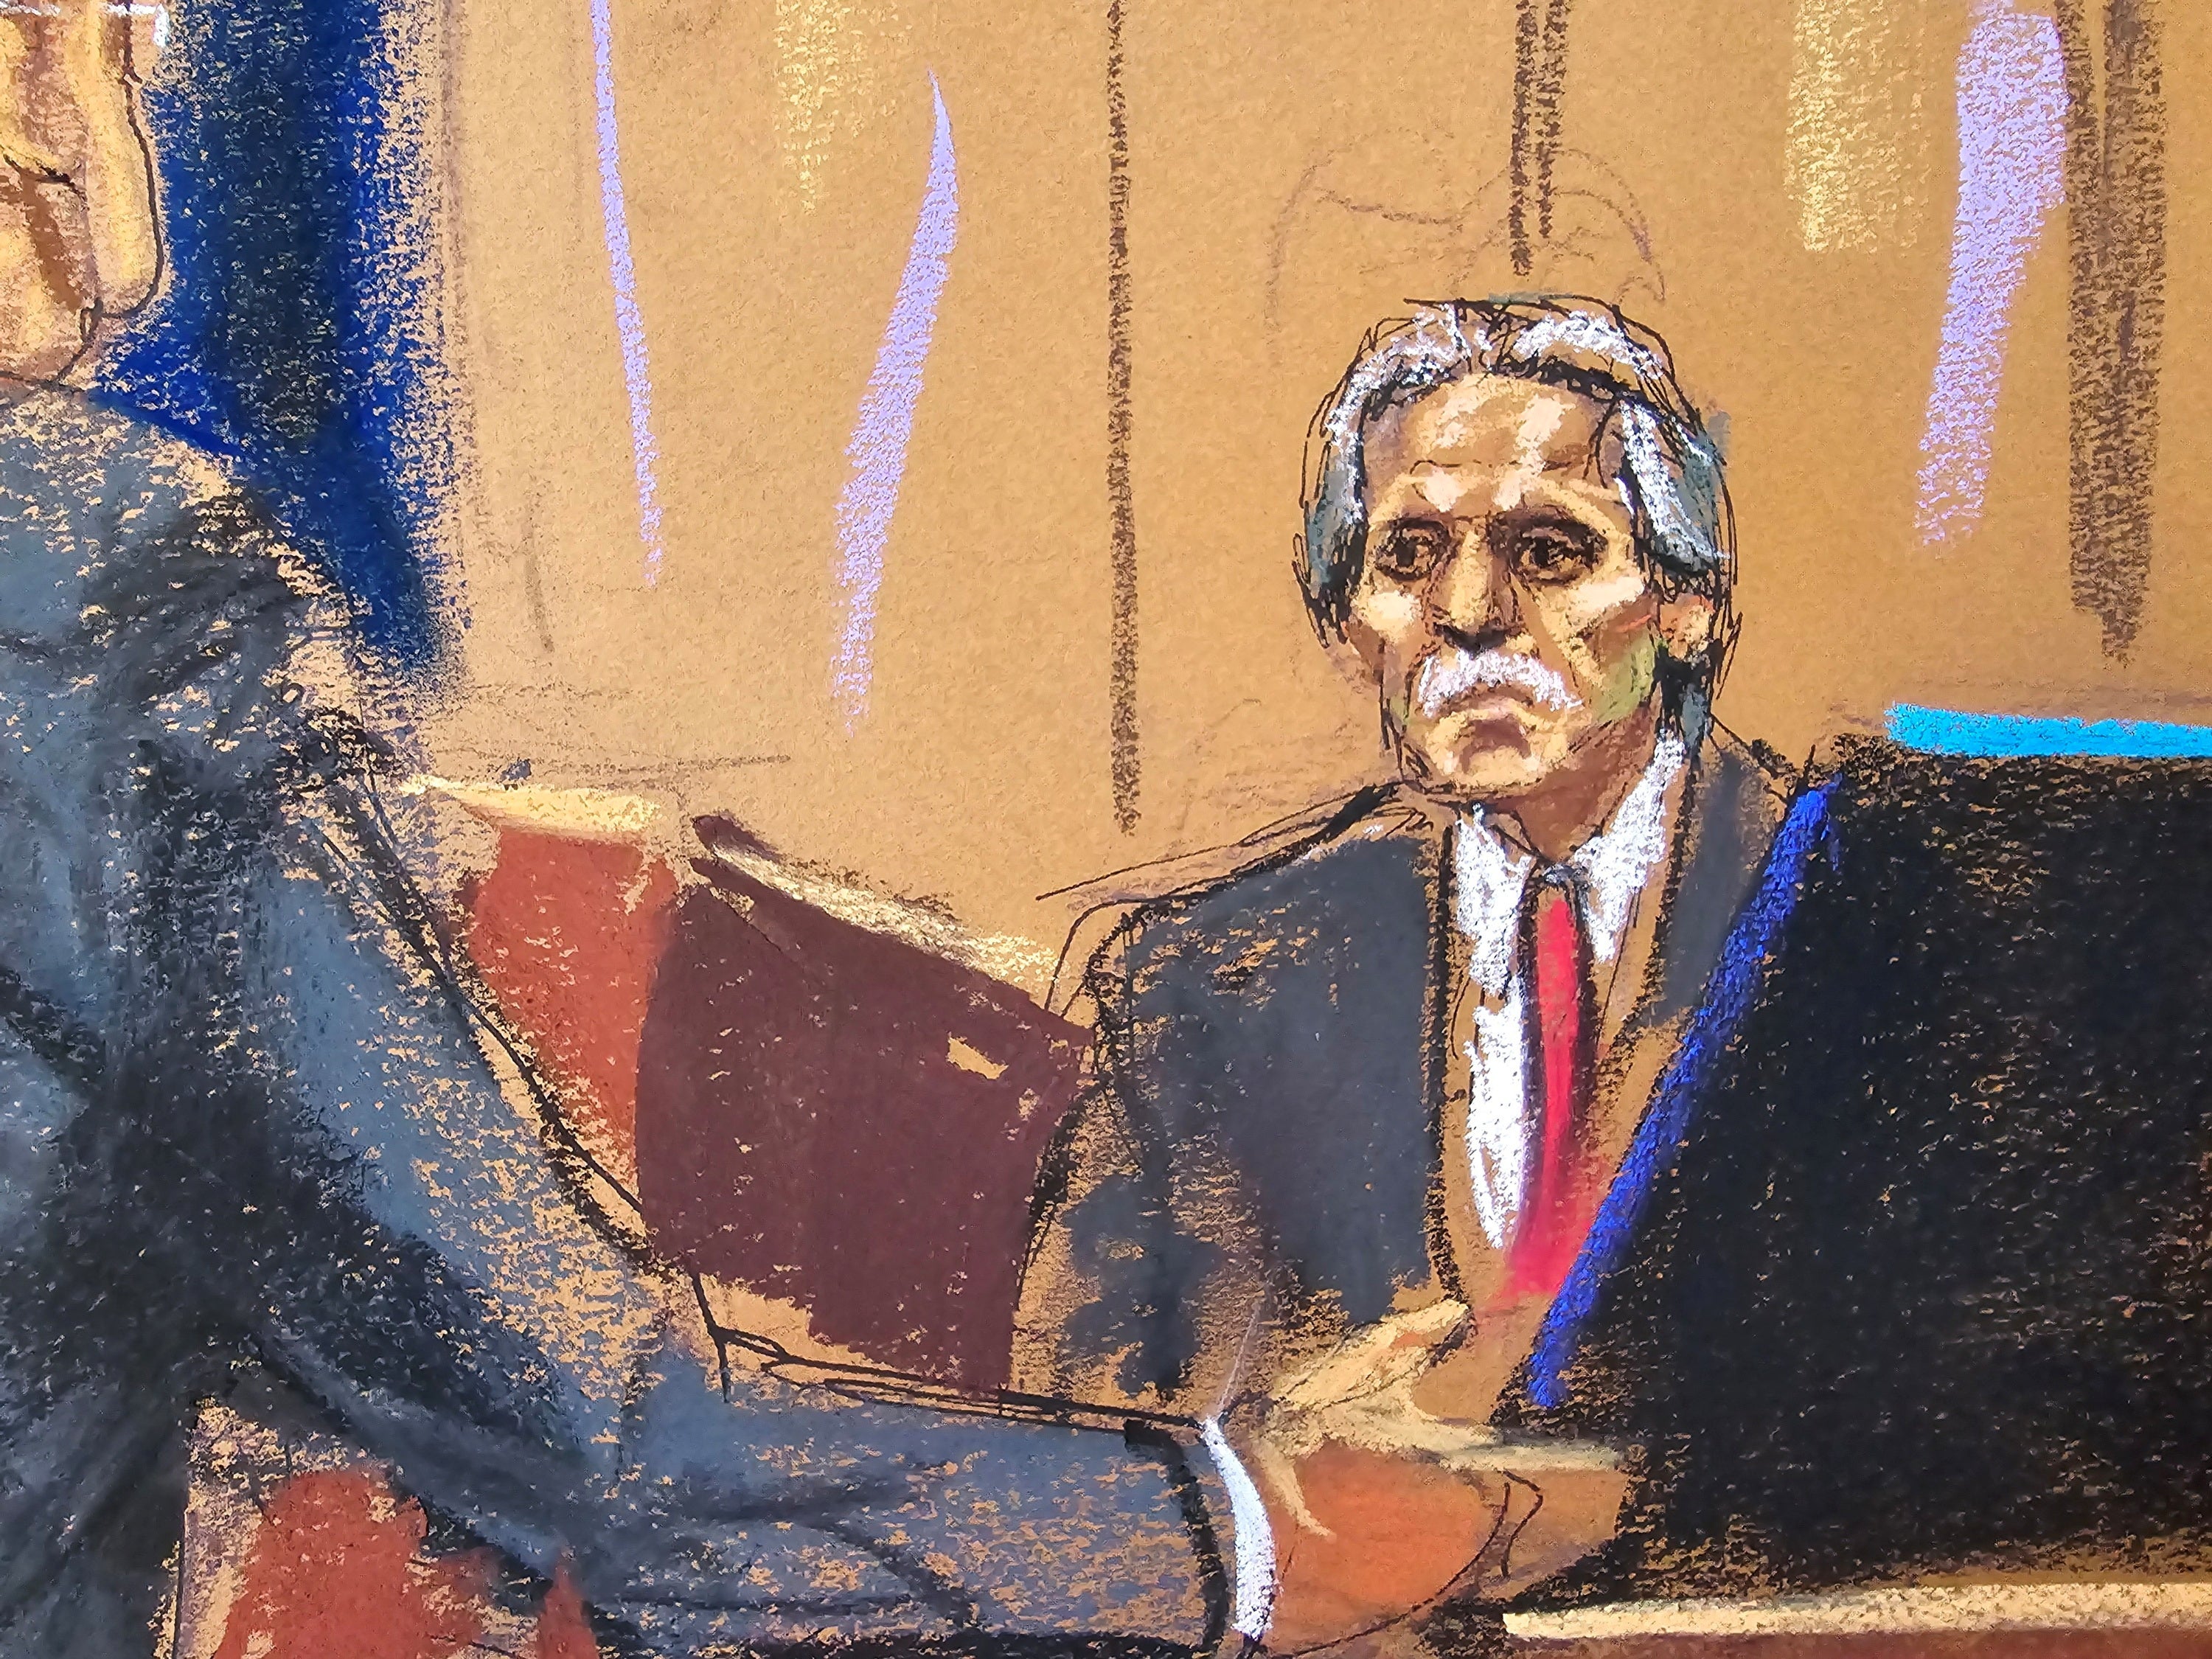 Former National Enquirer publisher David Pecker testifies in Donald Trump’s hush money trial in New York on 26 April